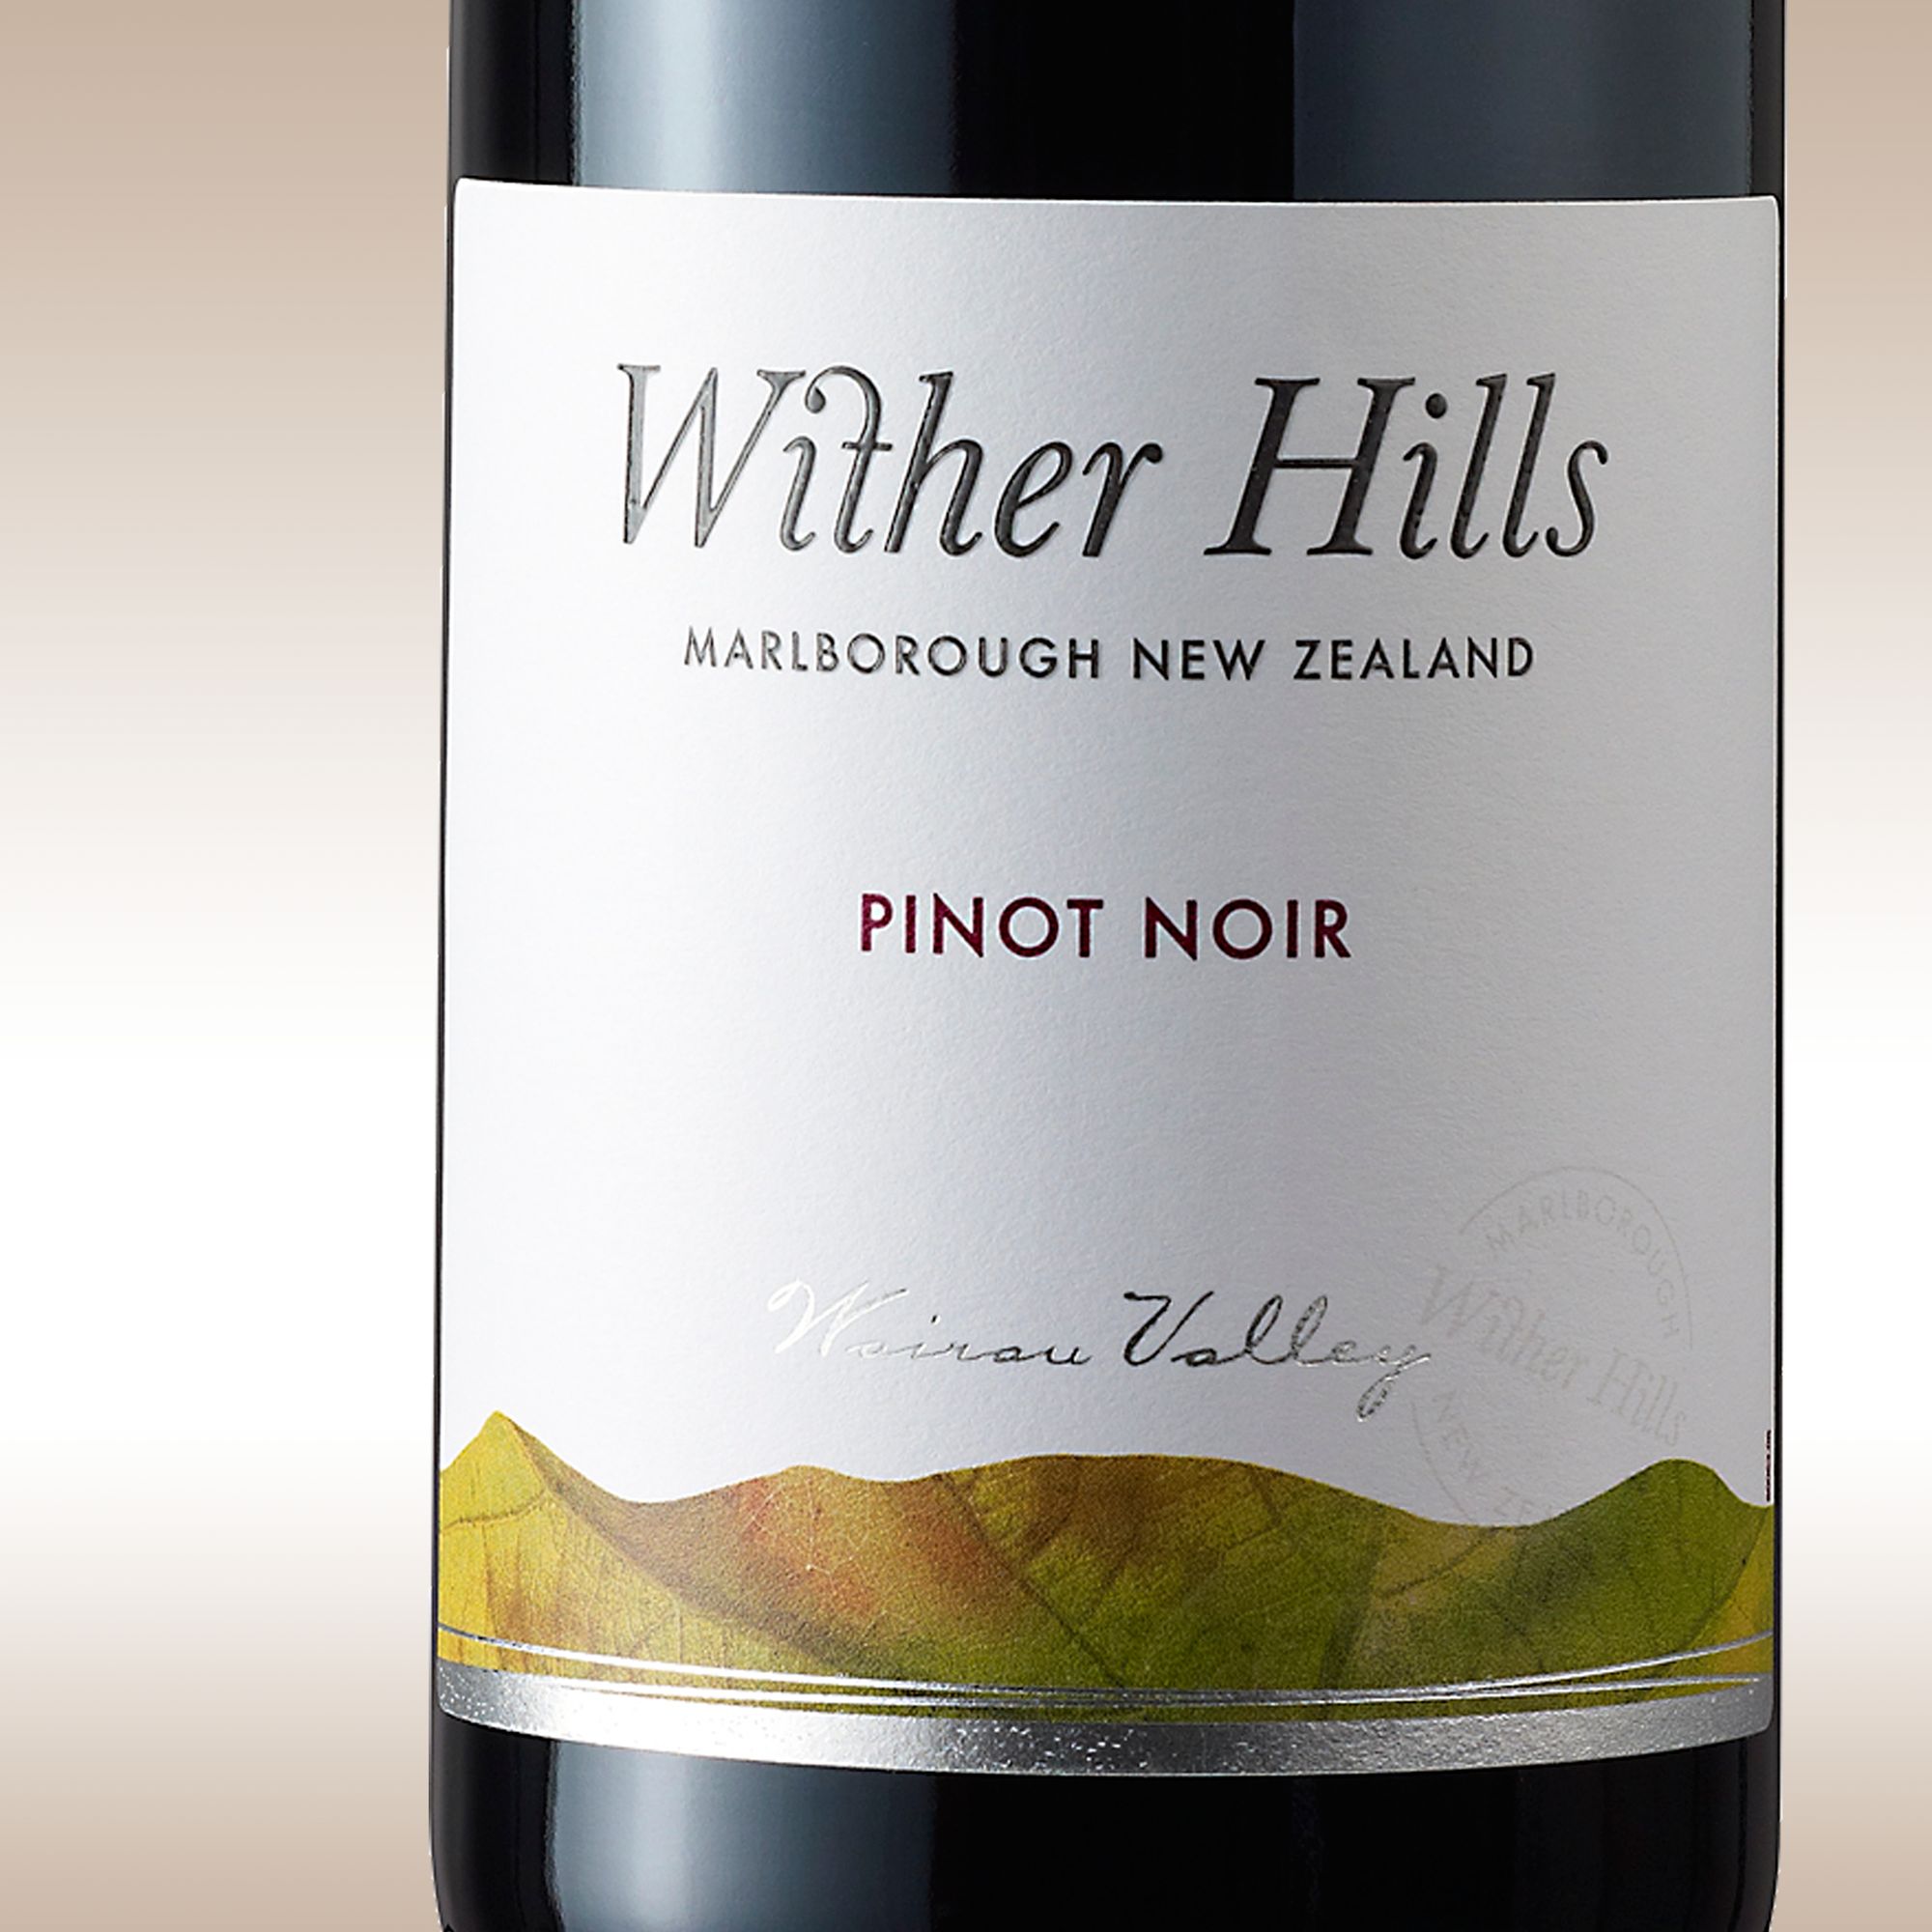 Unbranded Wither Hills Pinot Noir 2005/06 Marlborough, New Zealand